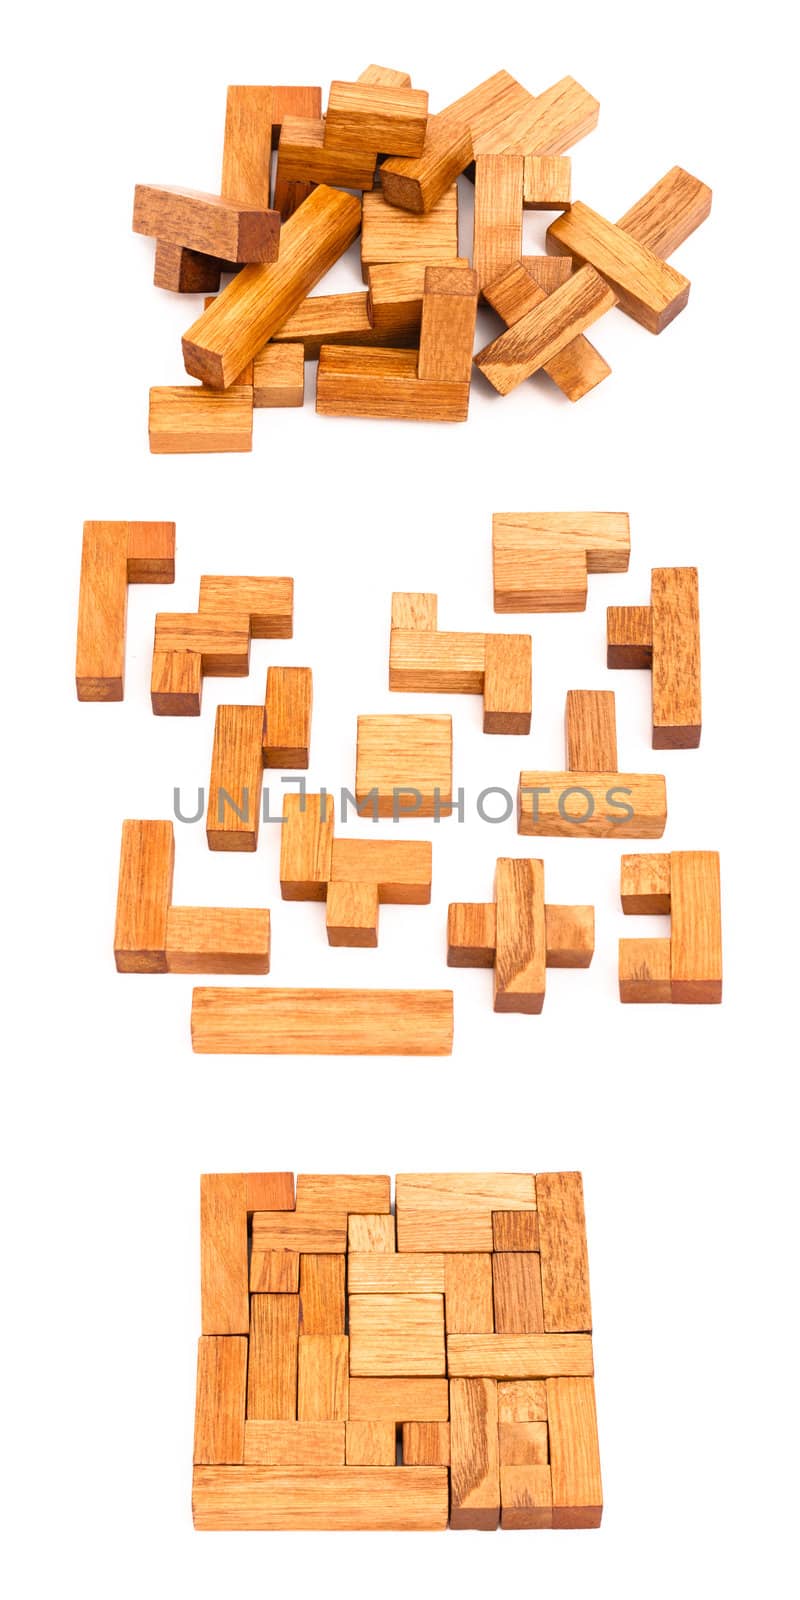 Wooden pentamino isolated on white in few different views